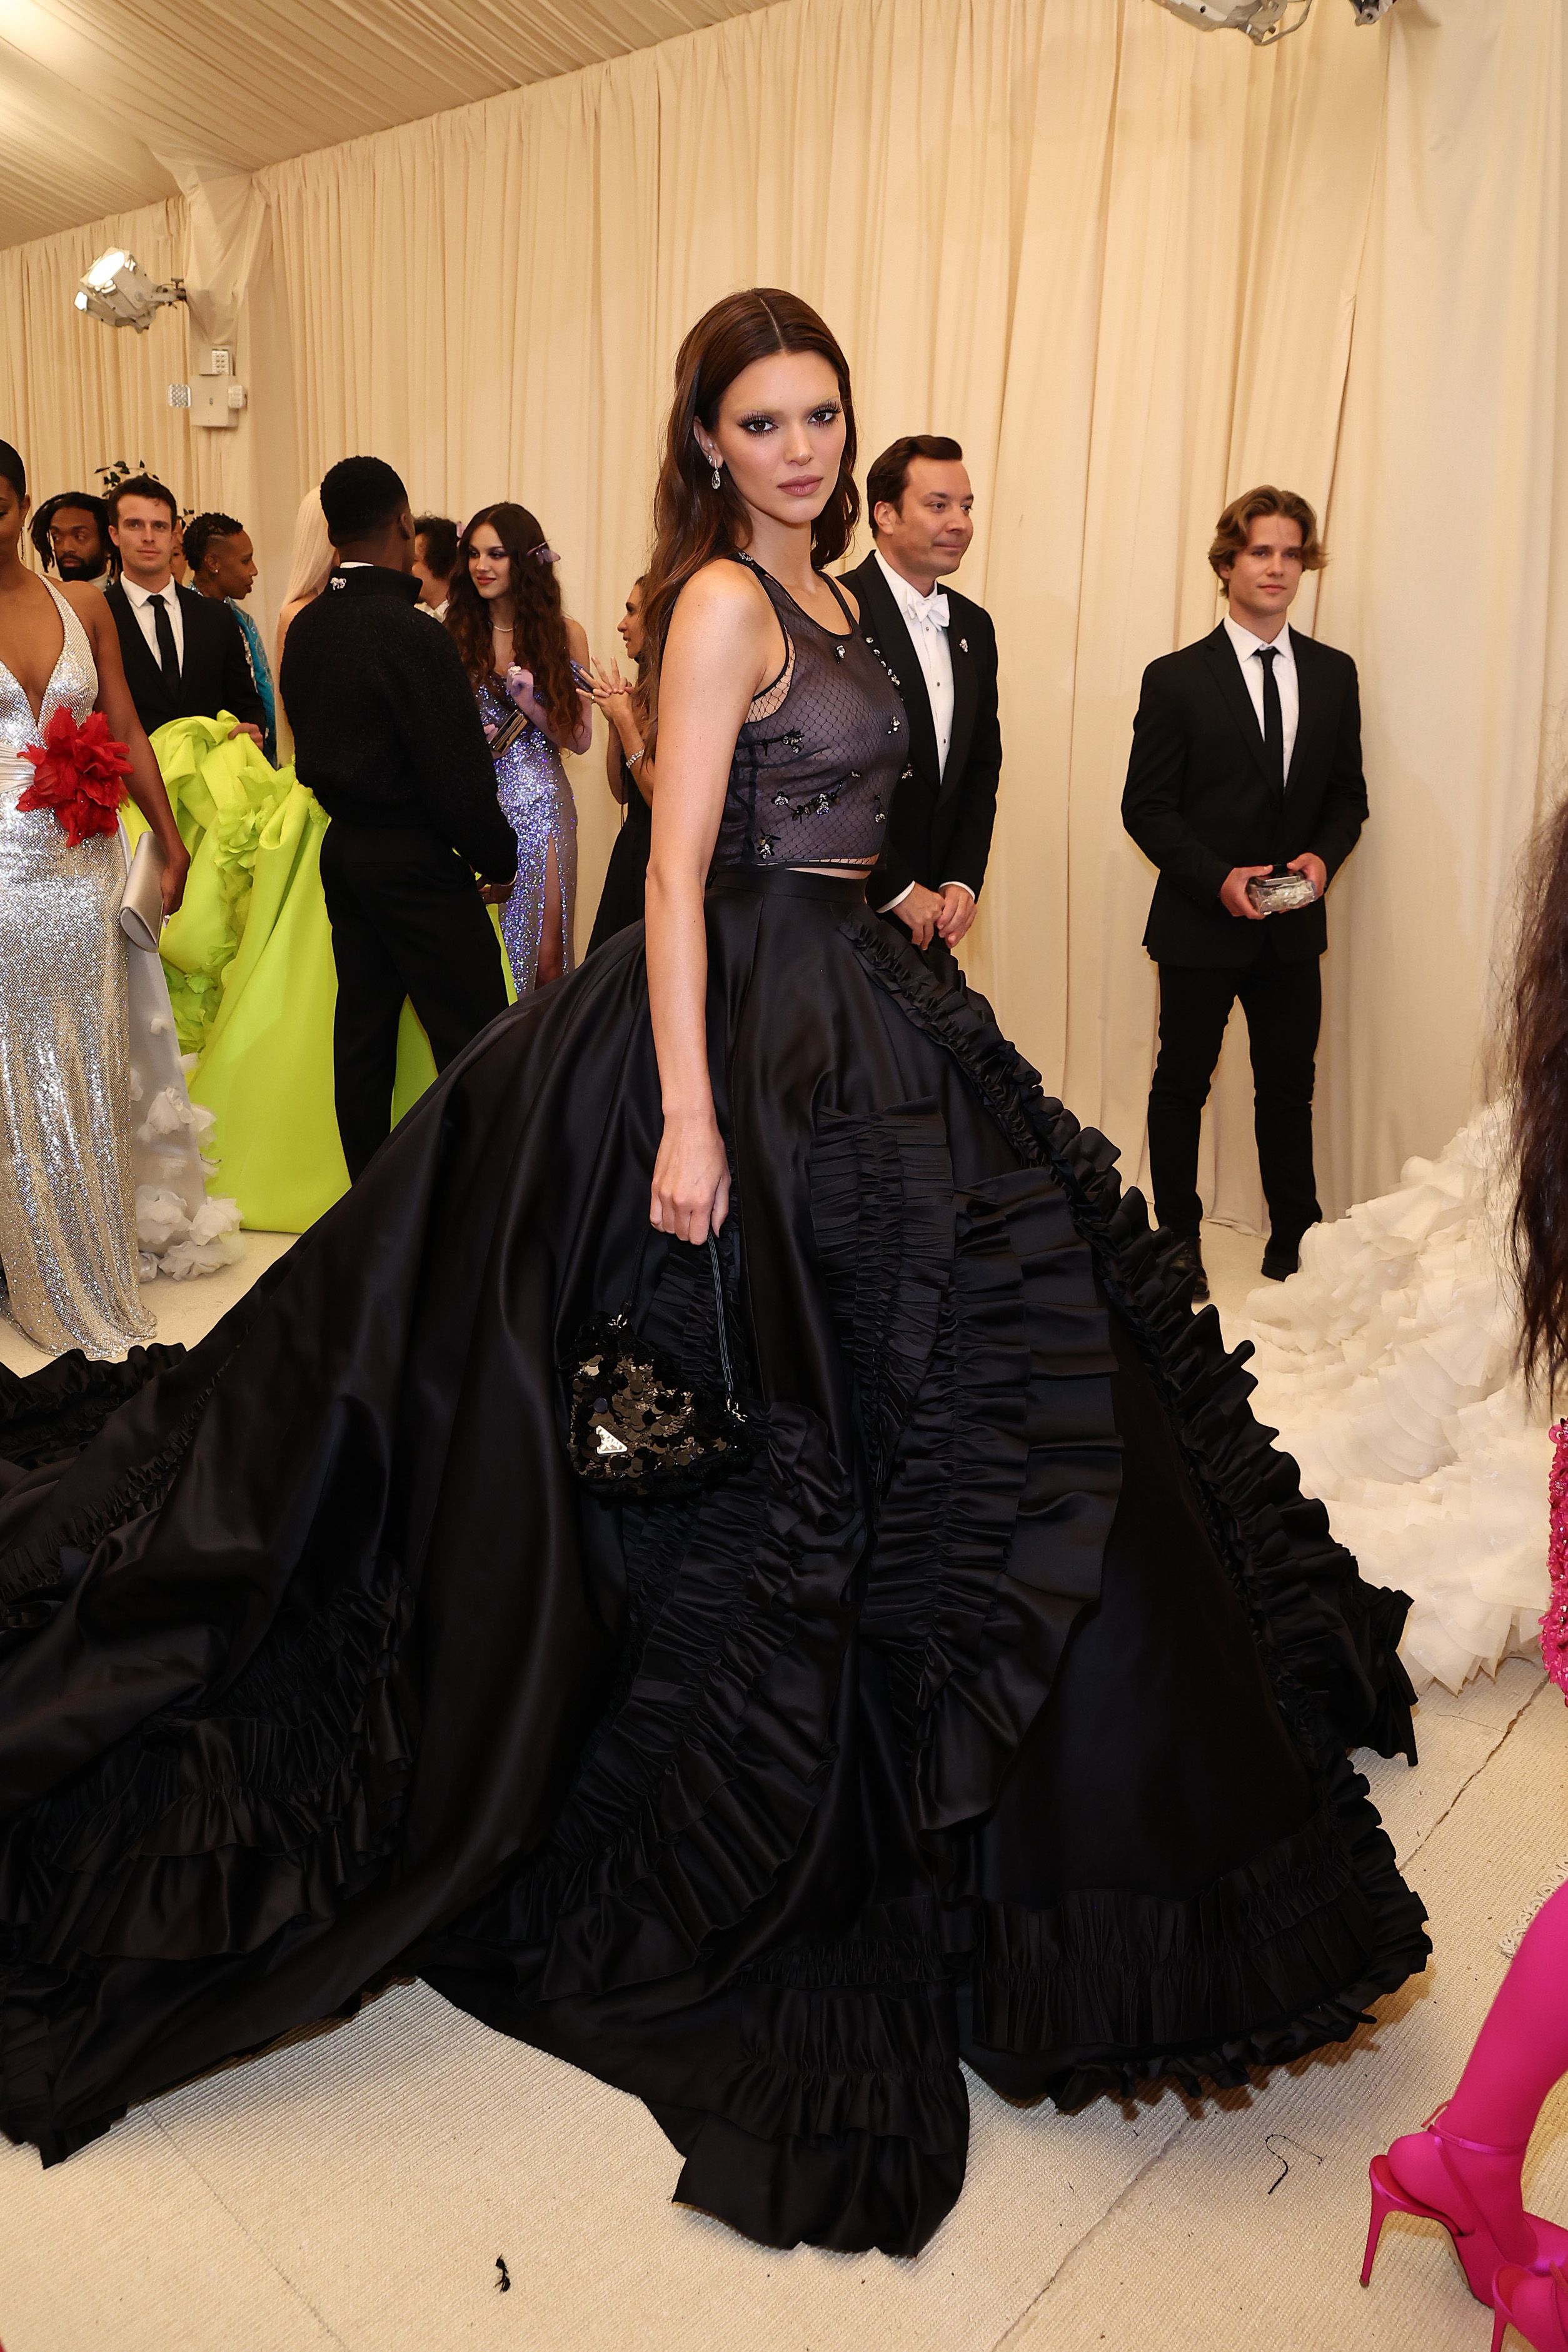 Met Gala 2022: When is it, who will be there, how much are tickets